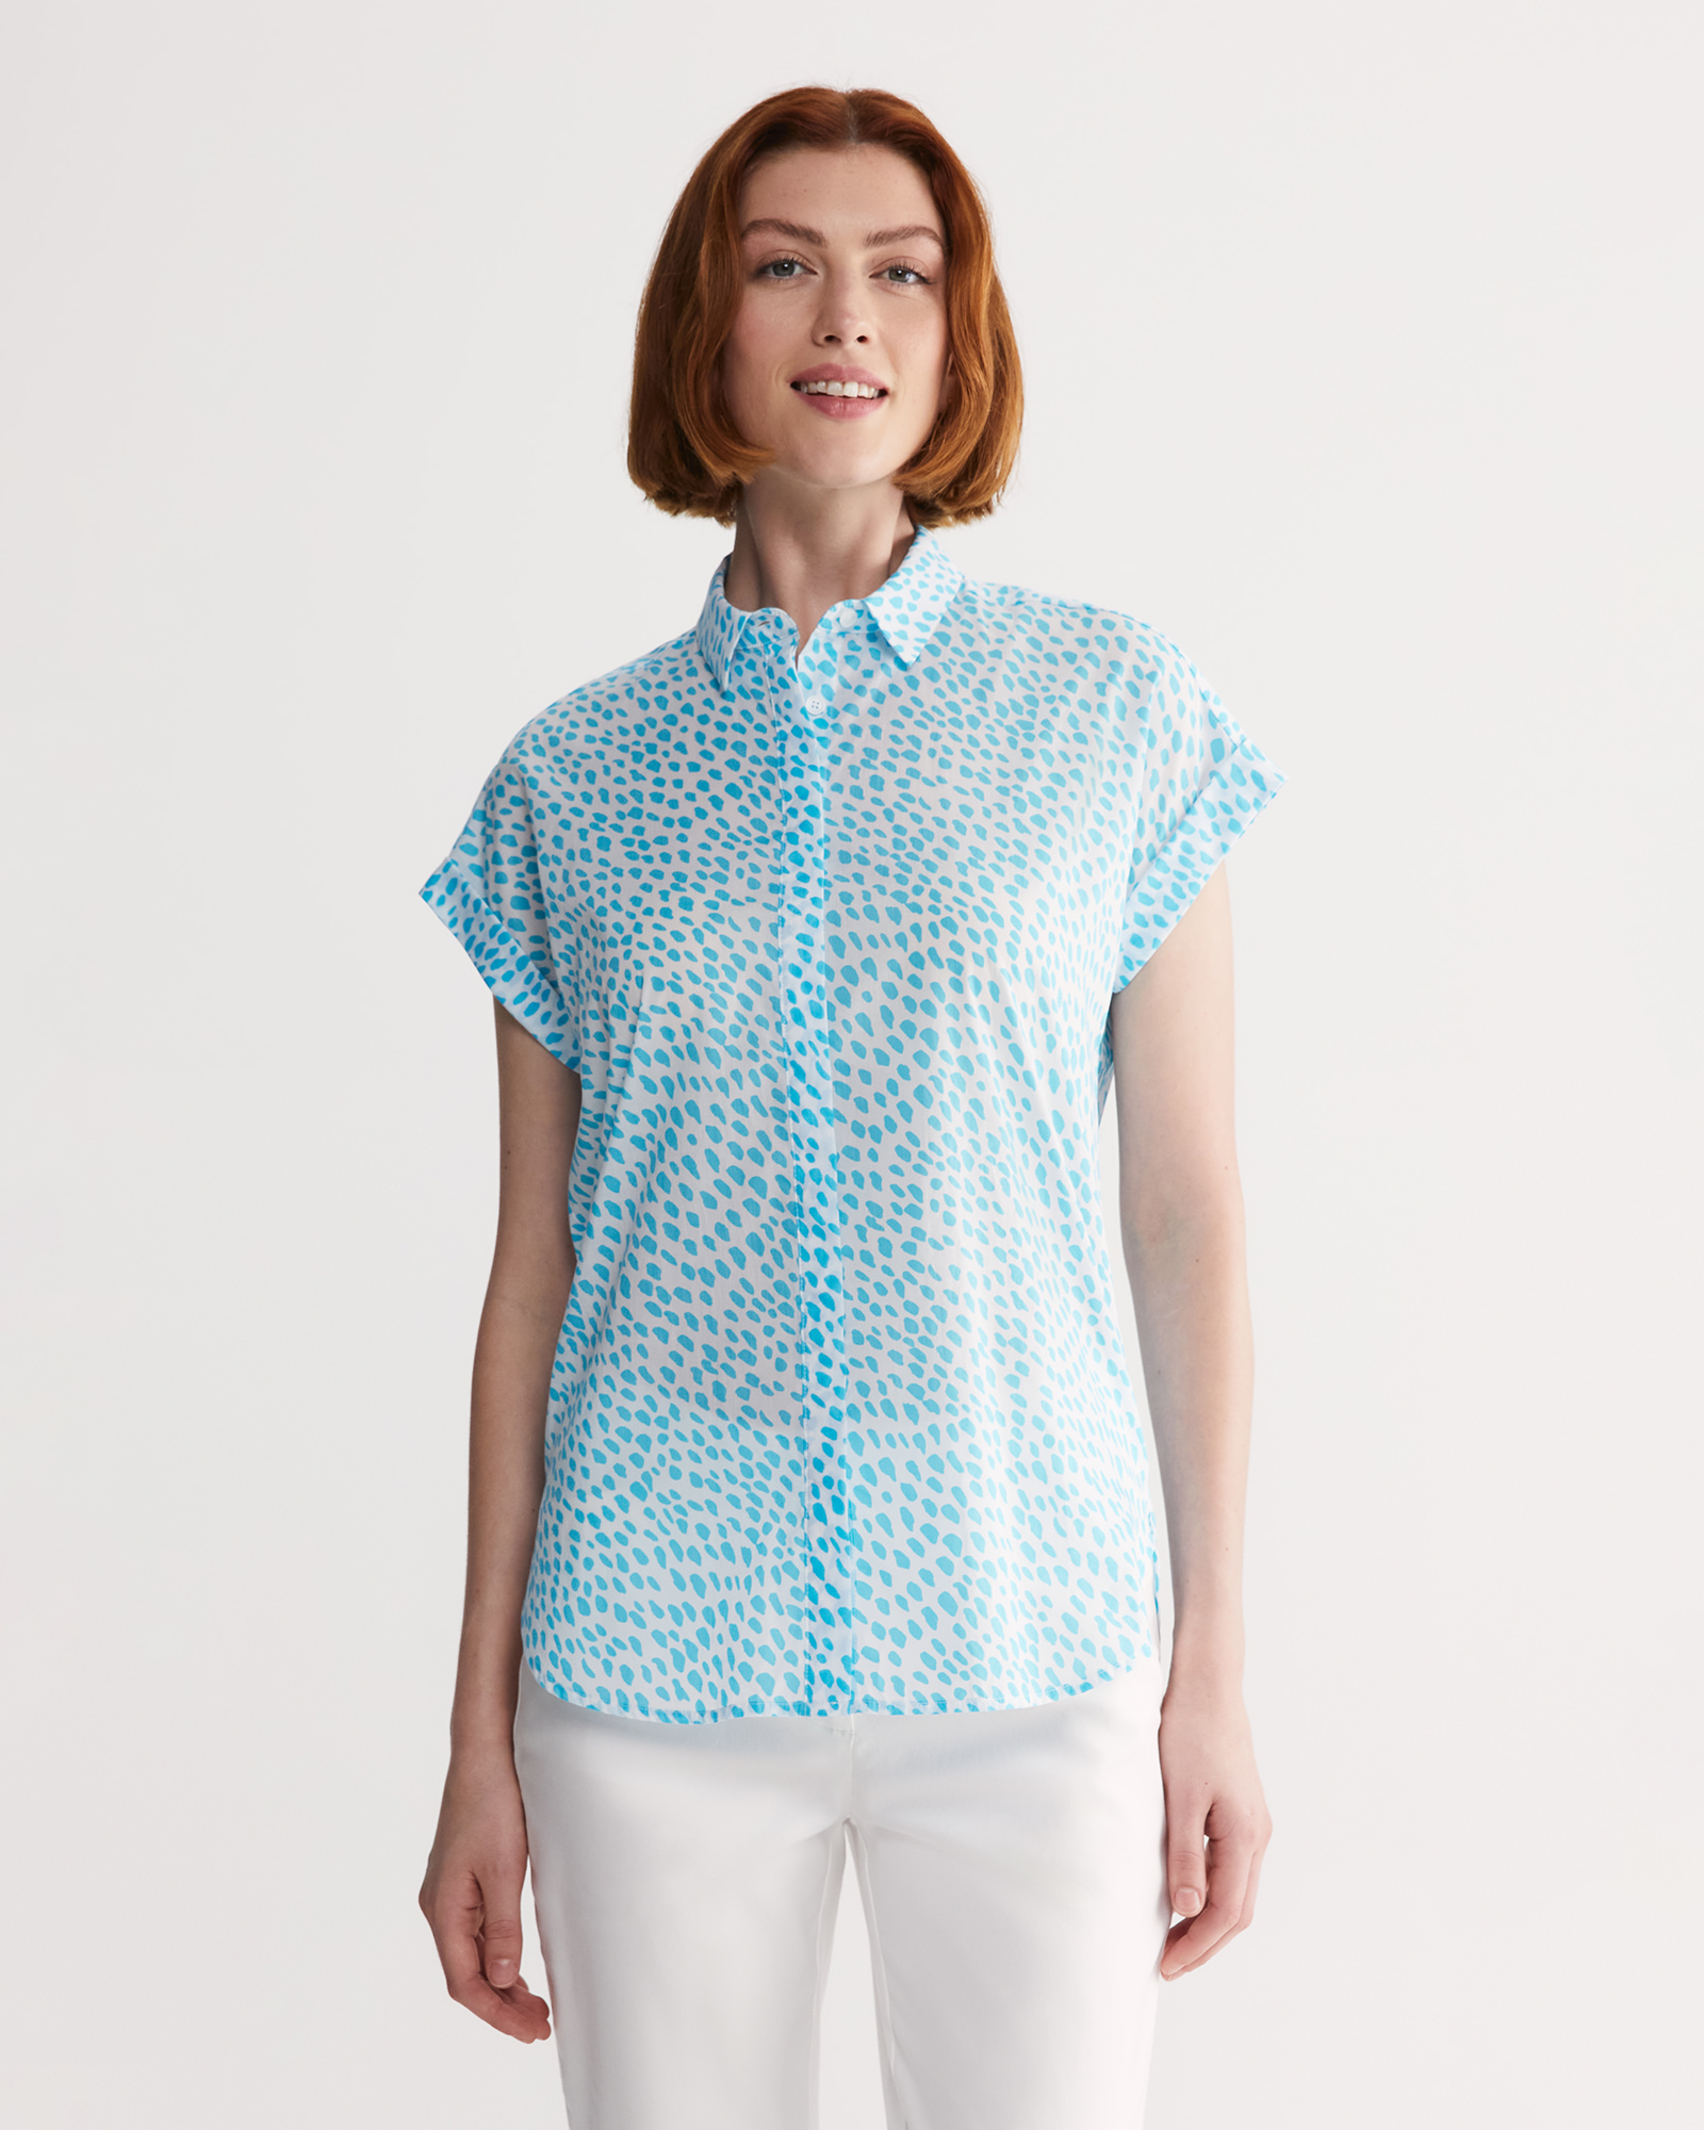 Dashed Lily Voile Short Sleeve Shirt in WHITE/BLUE